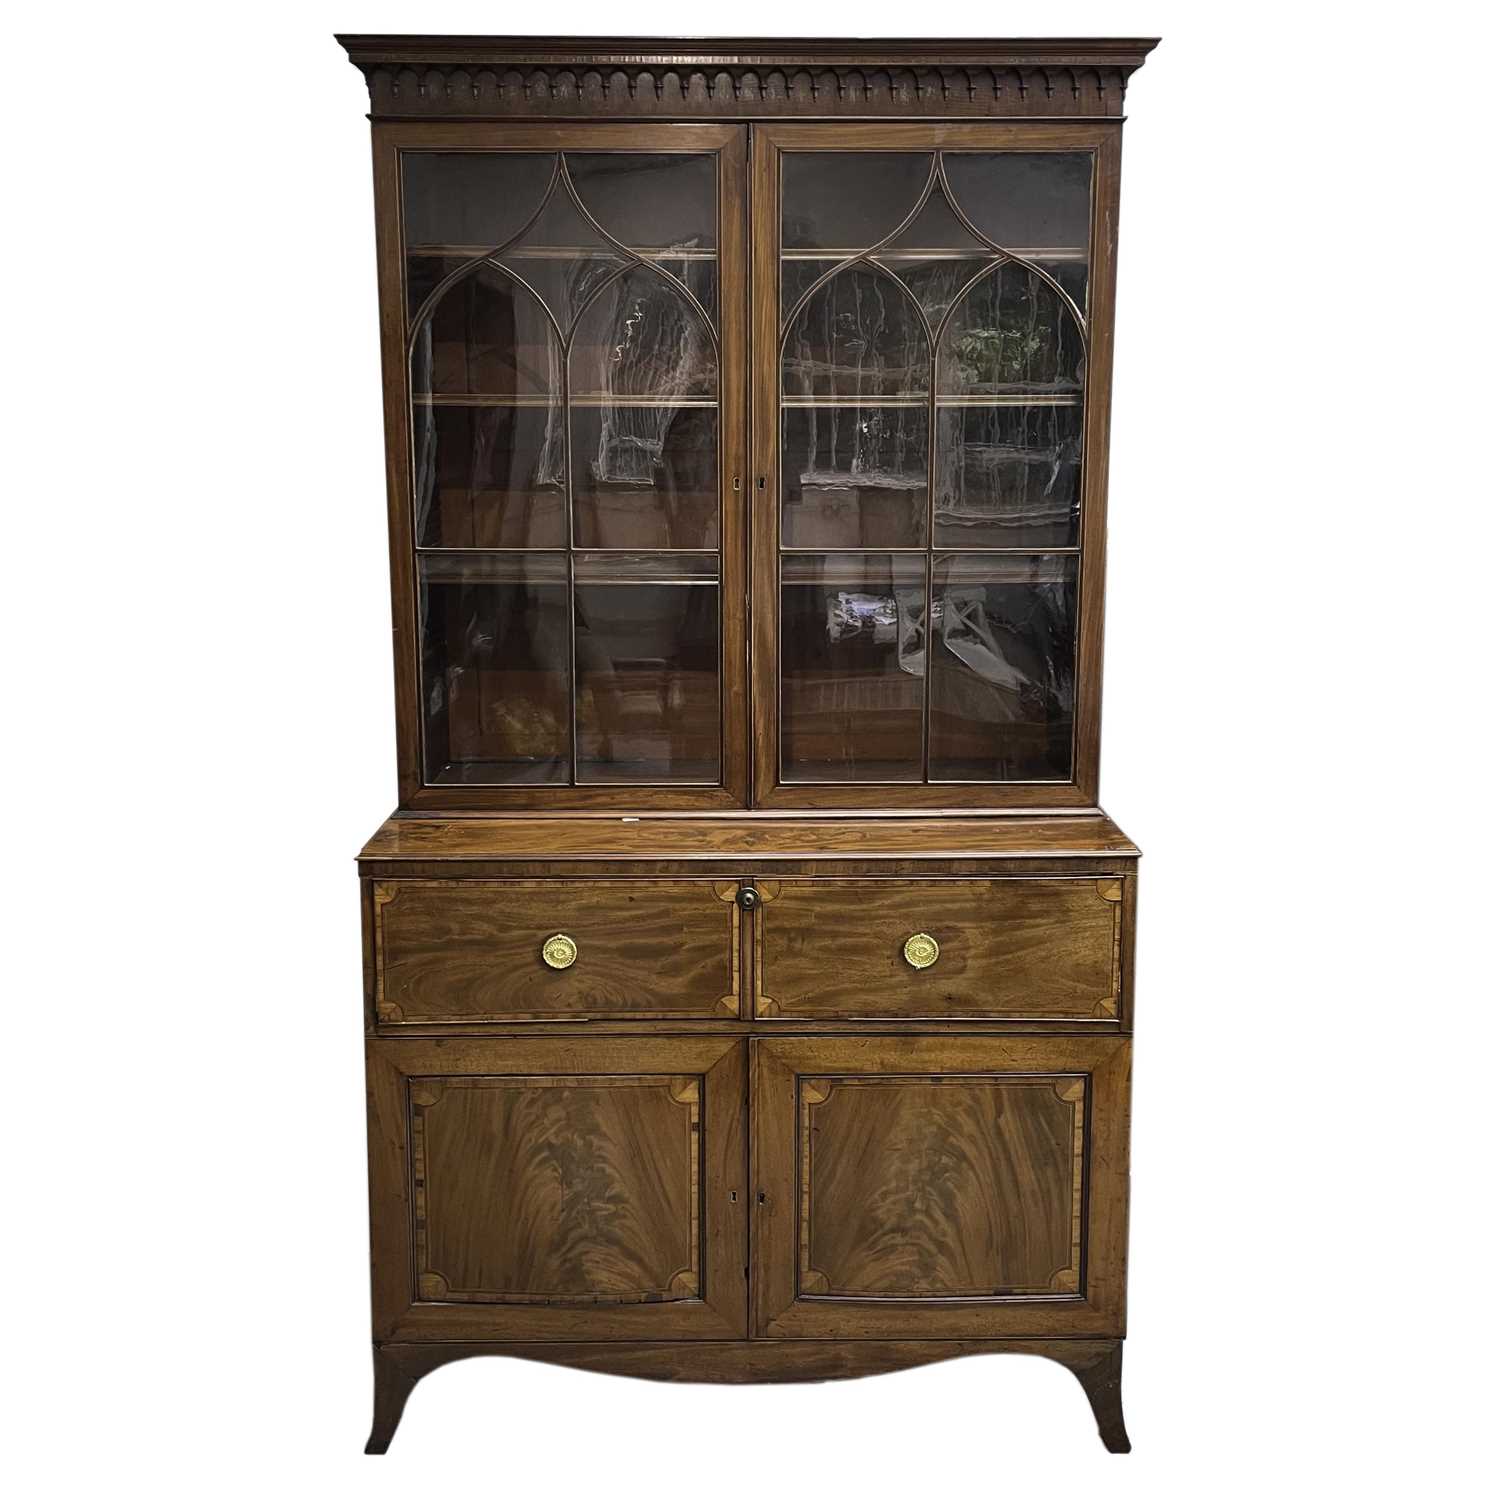 A George III mahogany and satinwood banded secretaire bookcase, with arcaded frieze, above two